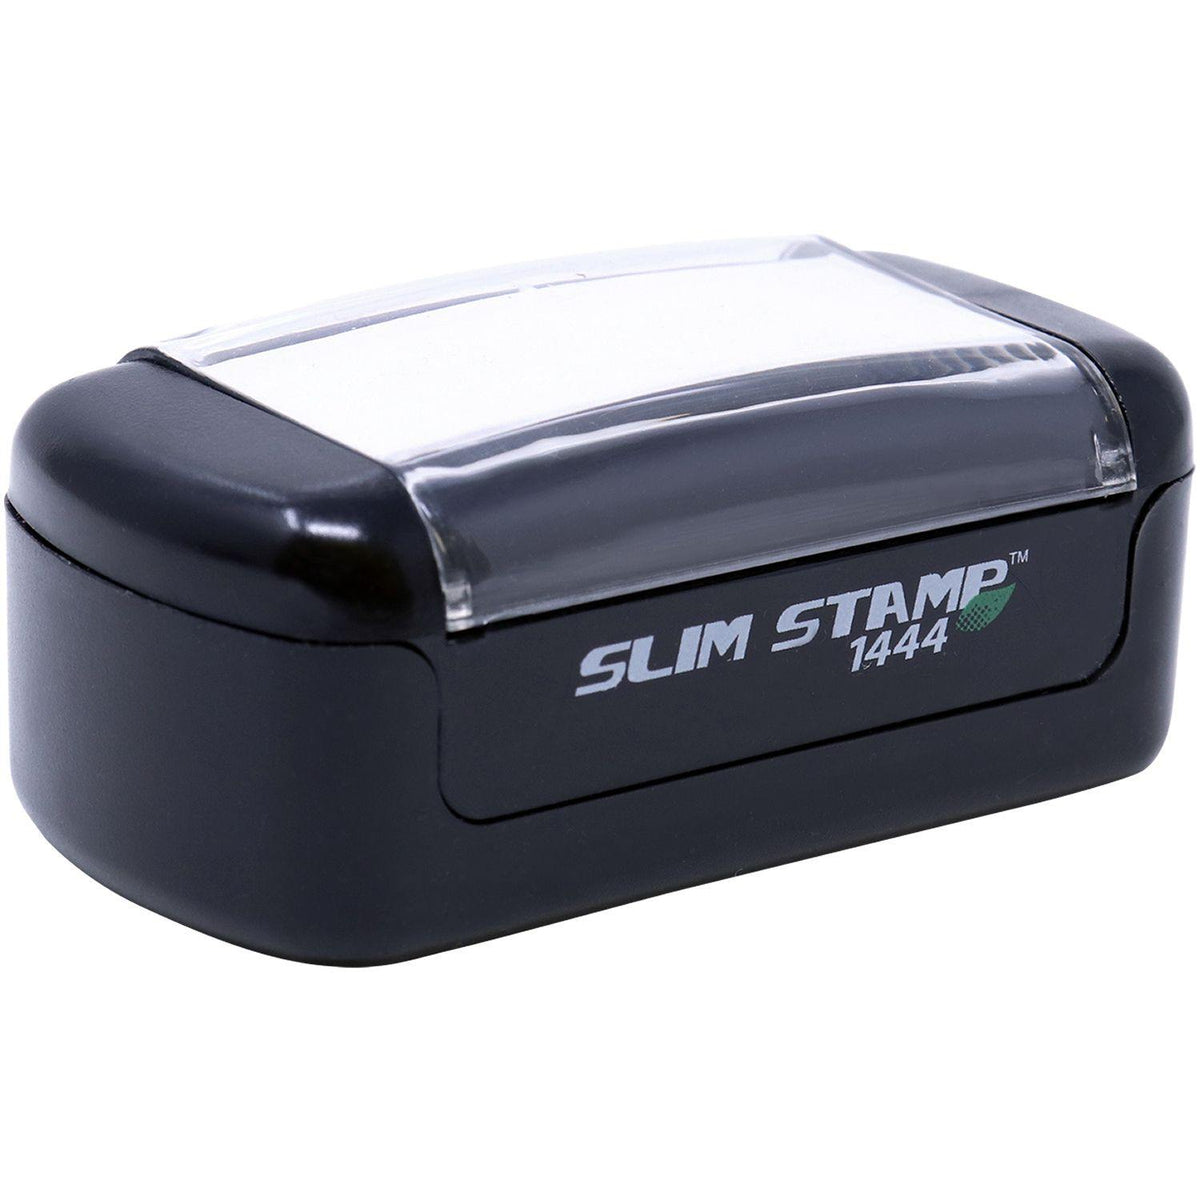 Alt View of Slim Pre-Inked Global Express Guaranteed Stamp Mount Angle